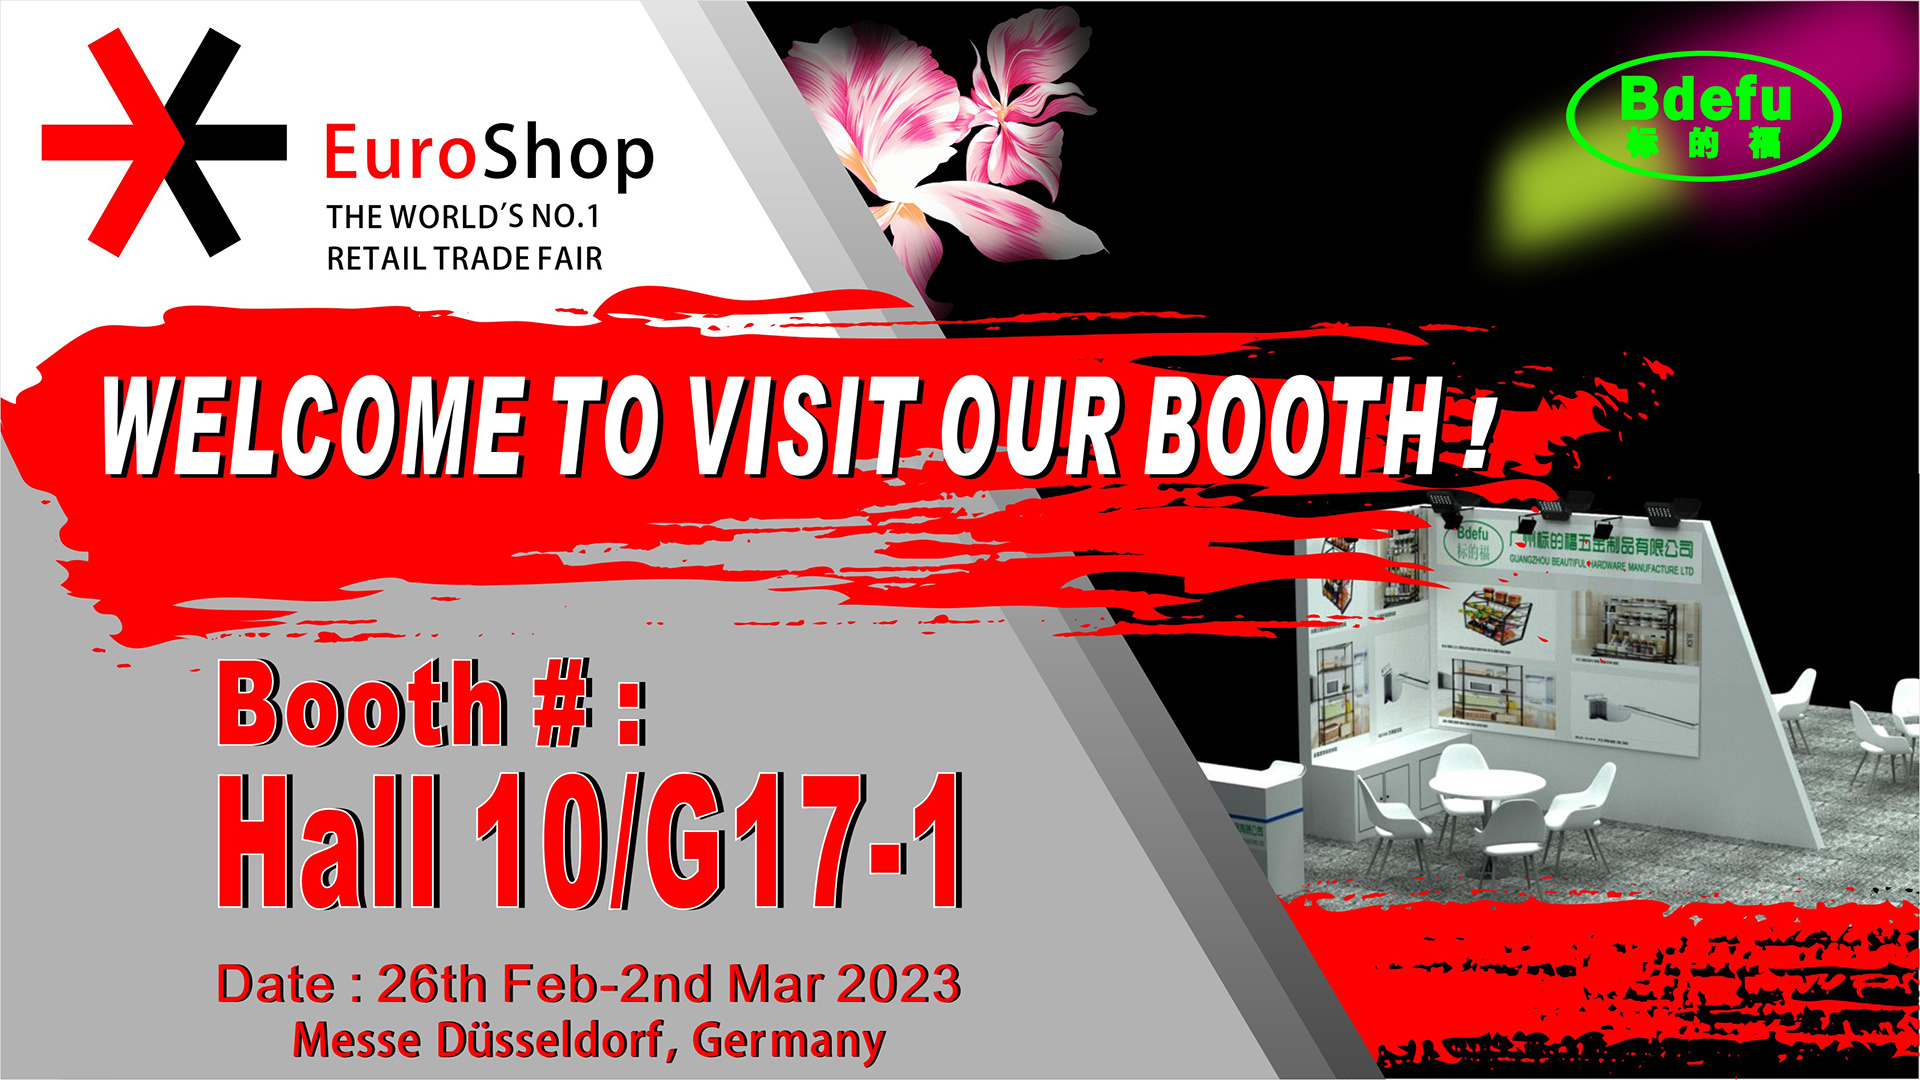 welcome to visit our booth!